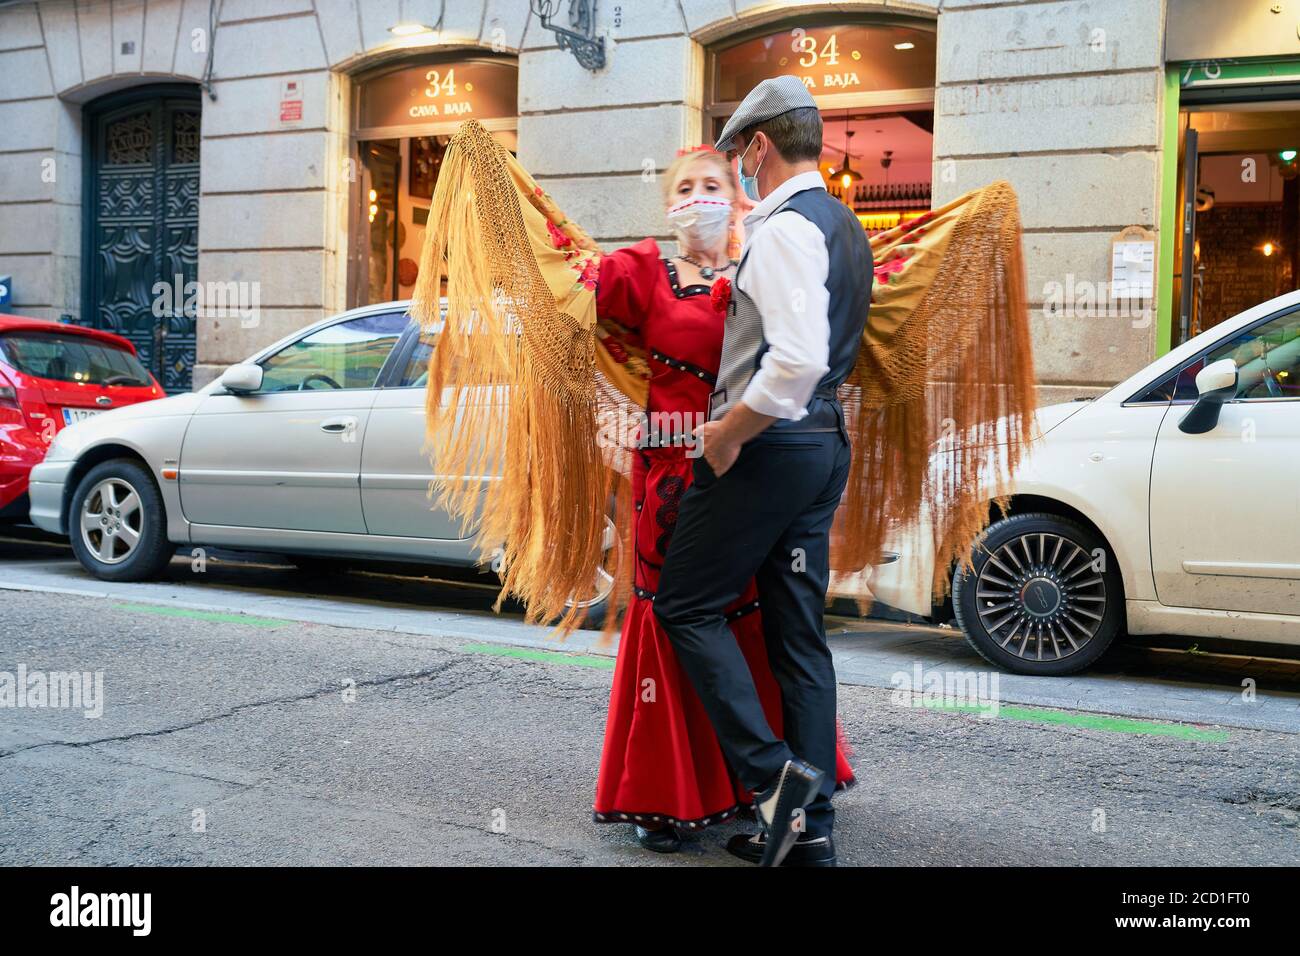 The virgen de la Paloma festivities did not go ahead but this facemask wearing dancing couple celebrated anyway, La Latina, Madrid, Spain, August 2020 Stock Photo